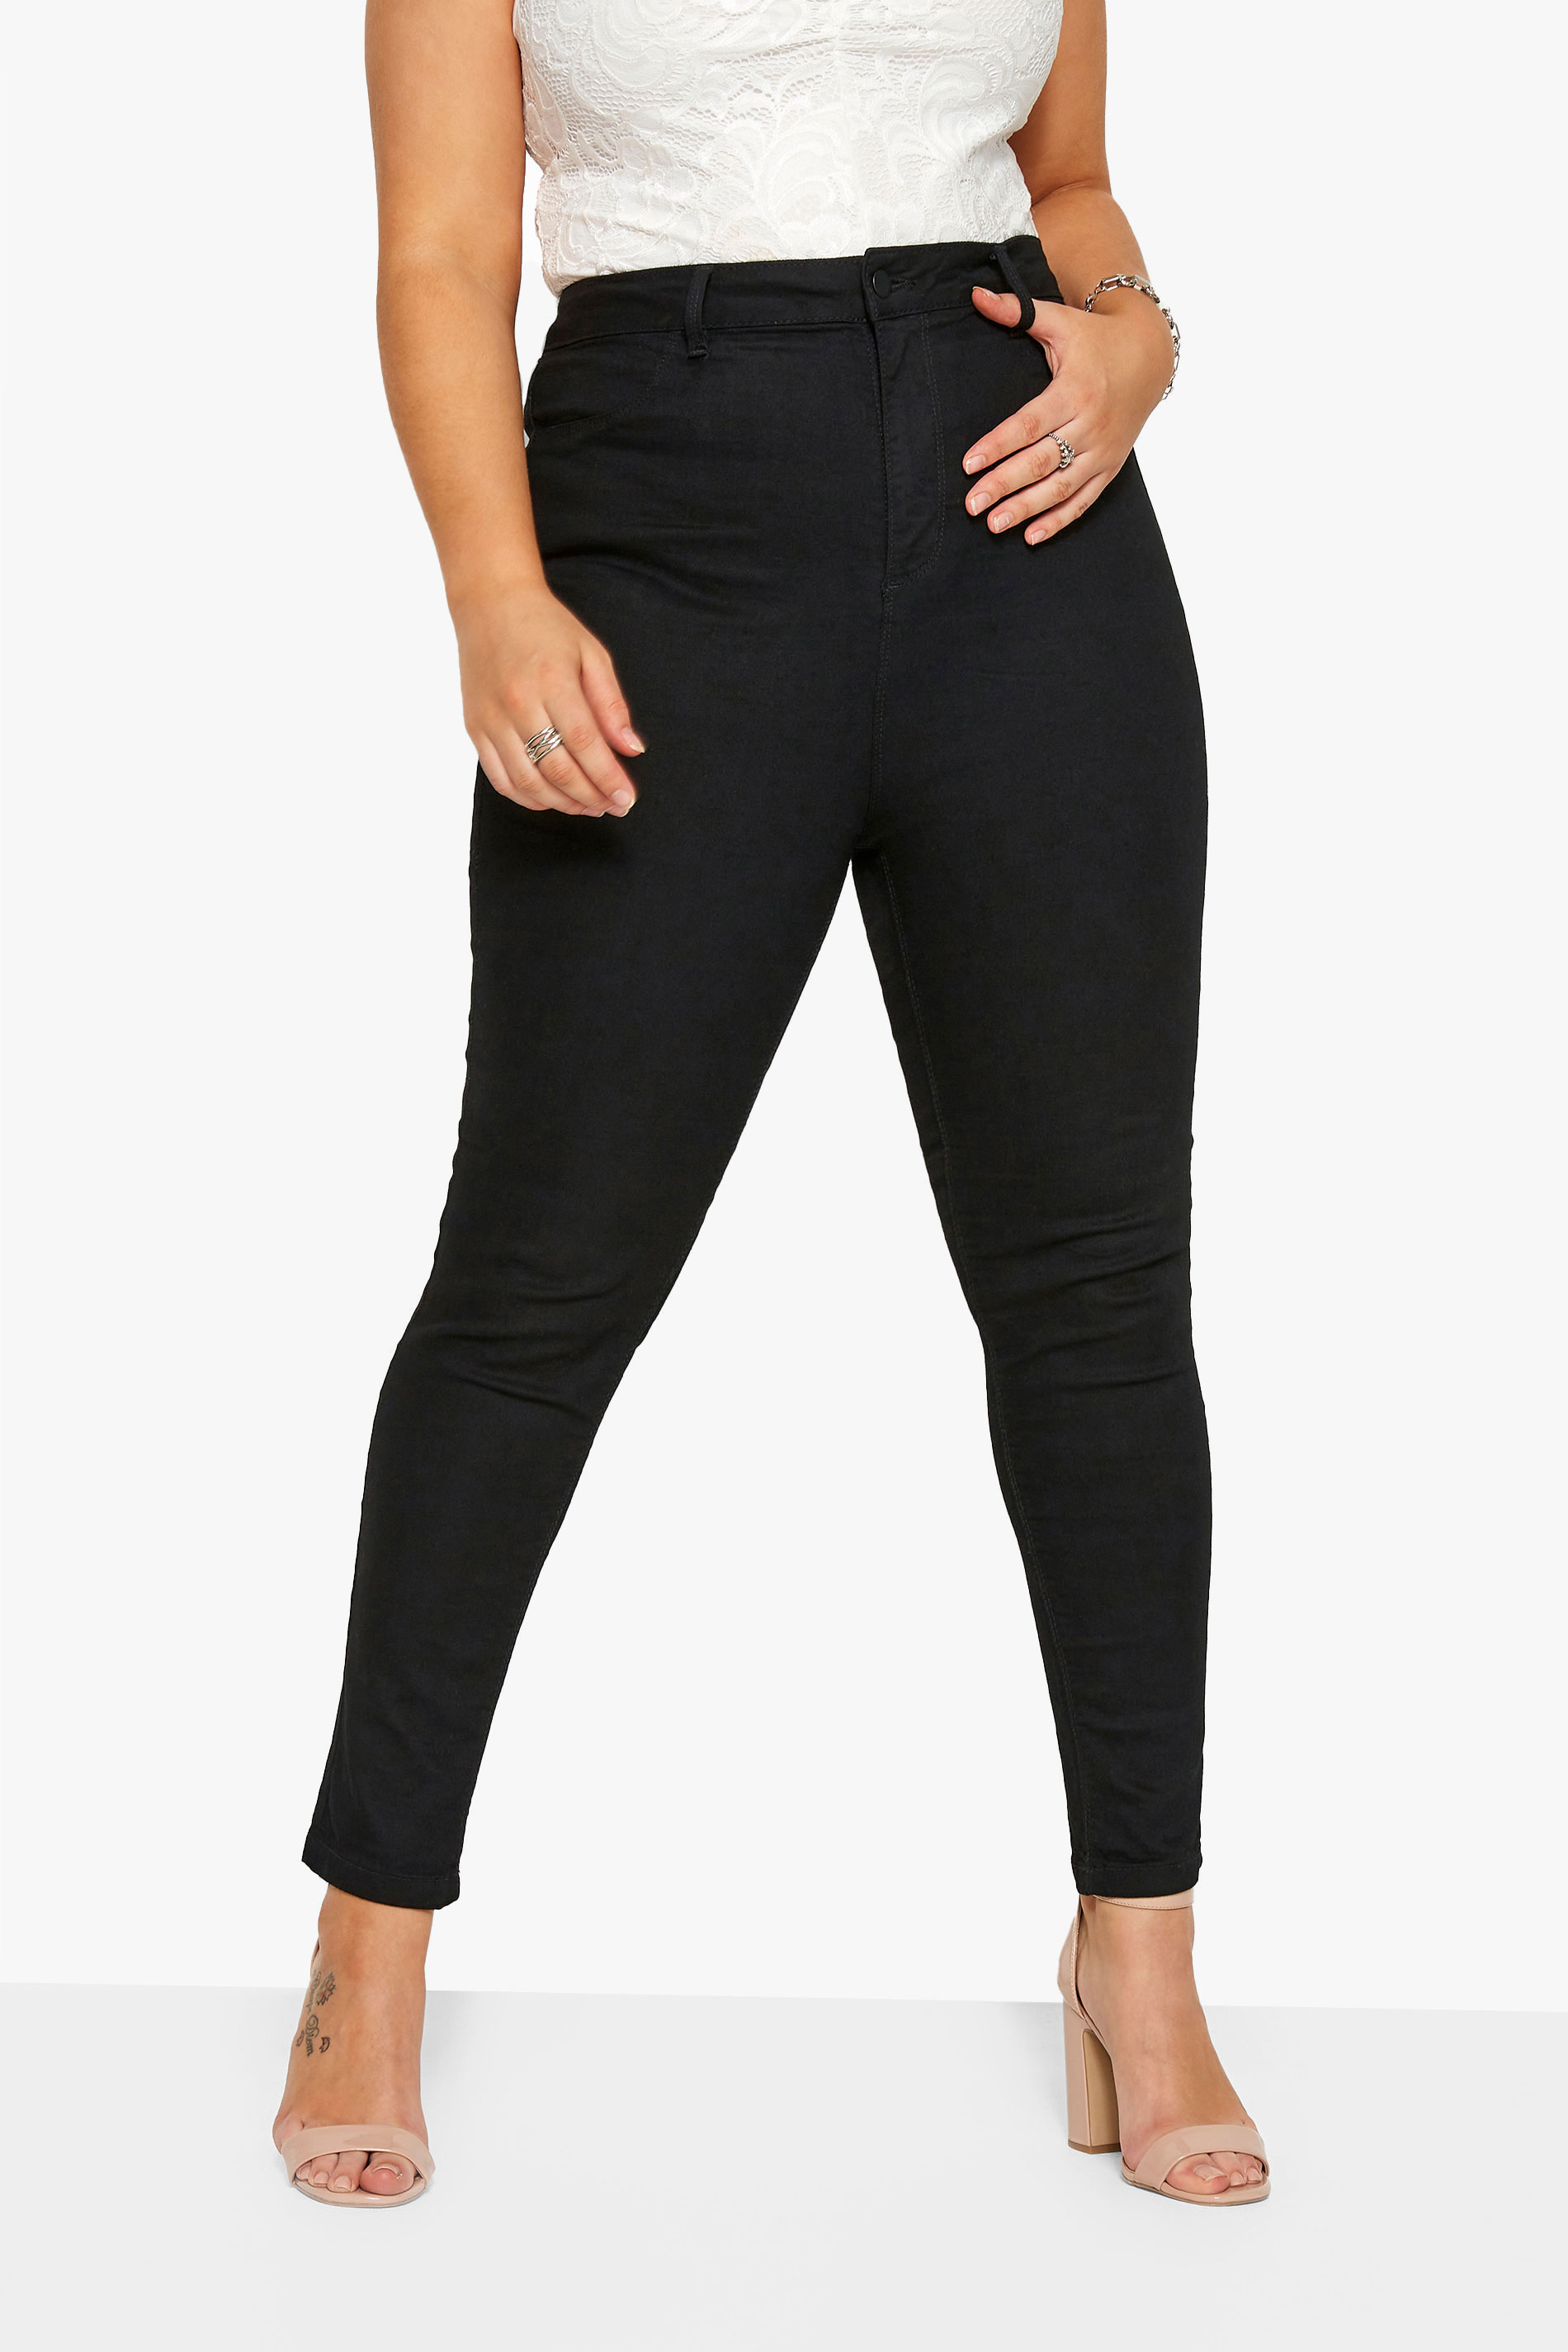 YOURS FOR GOOD Black Skinny Stretch AVA Jeans_B.jpg